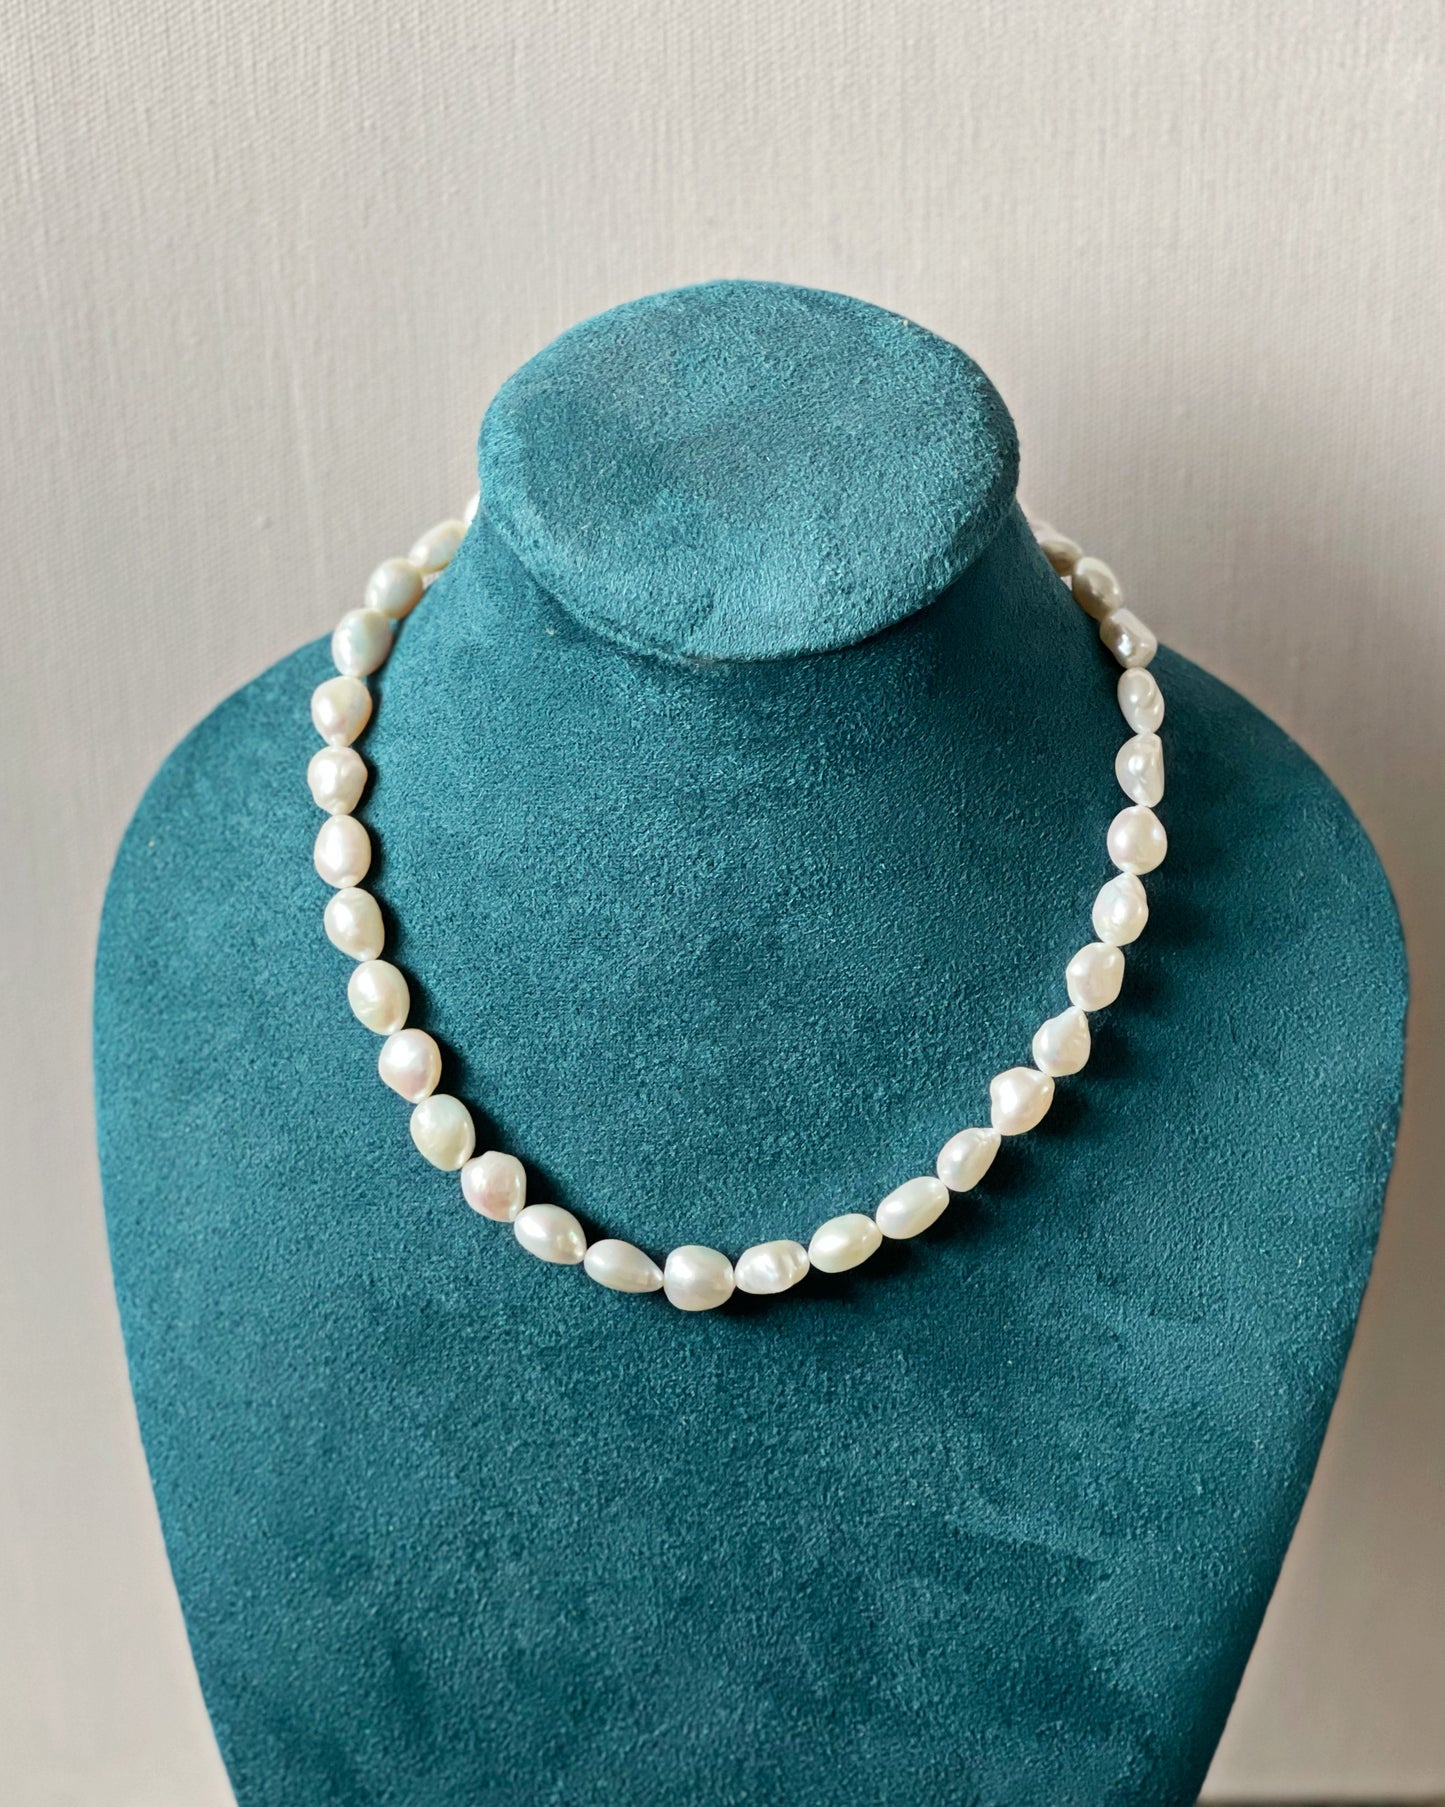 Medium white wedding pearl necklace with heart toggle